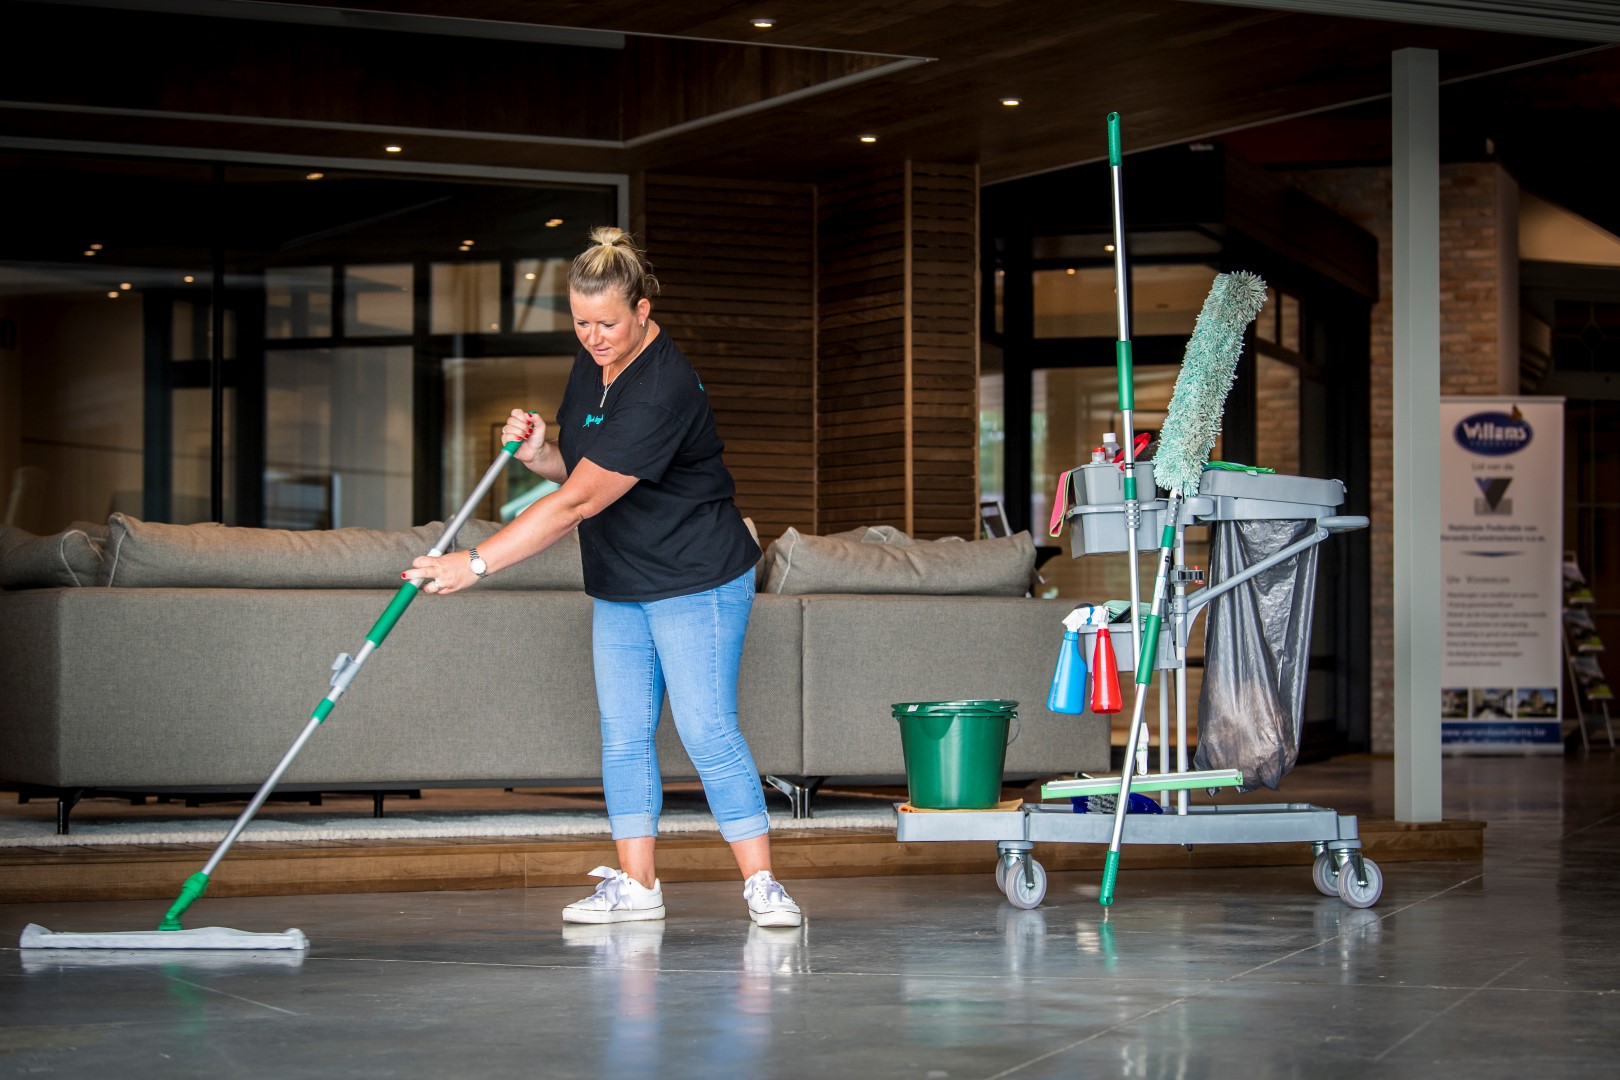 Willems Veranda's is very happy with the cleaning services offered by Cleaning Masters.